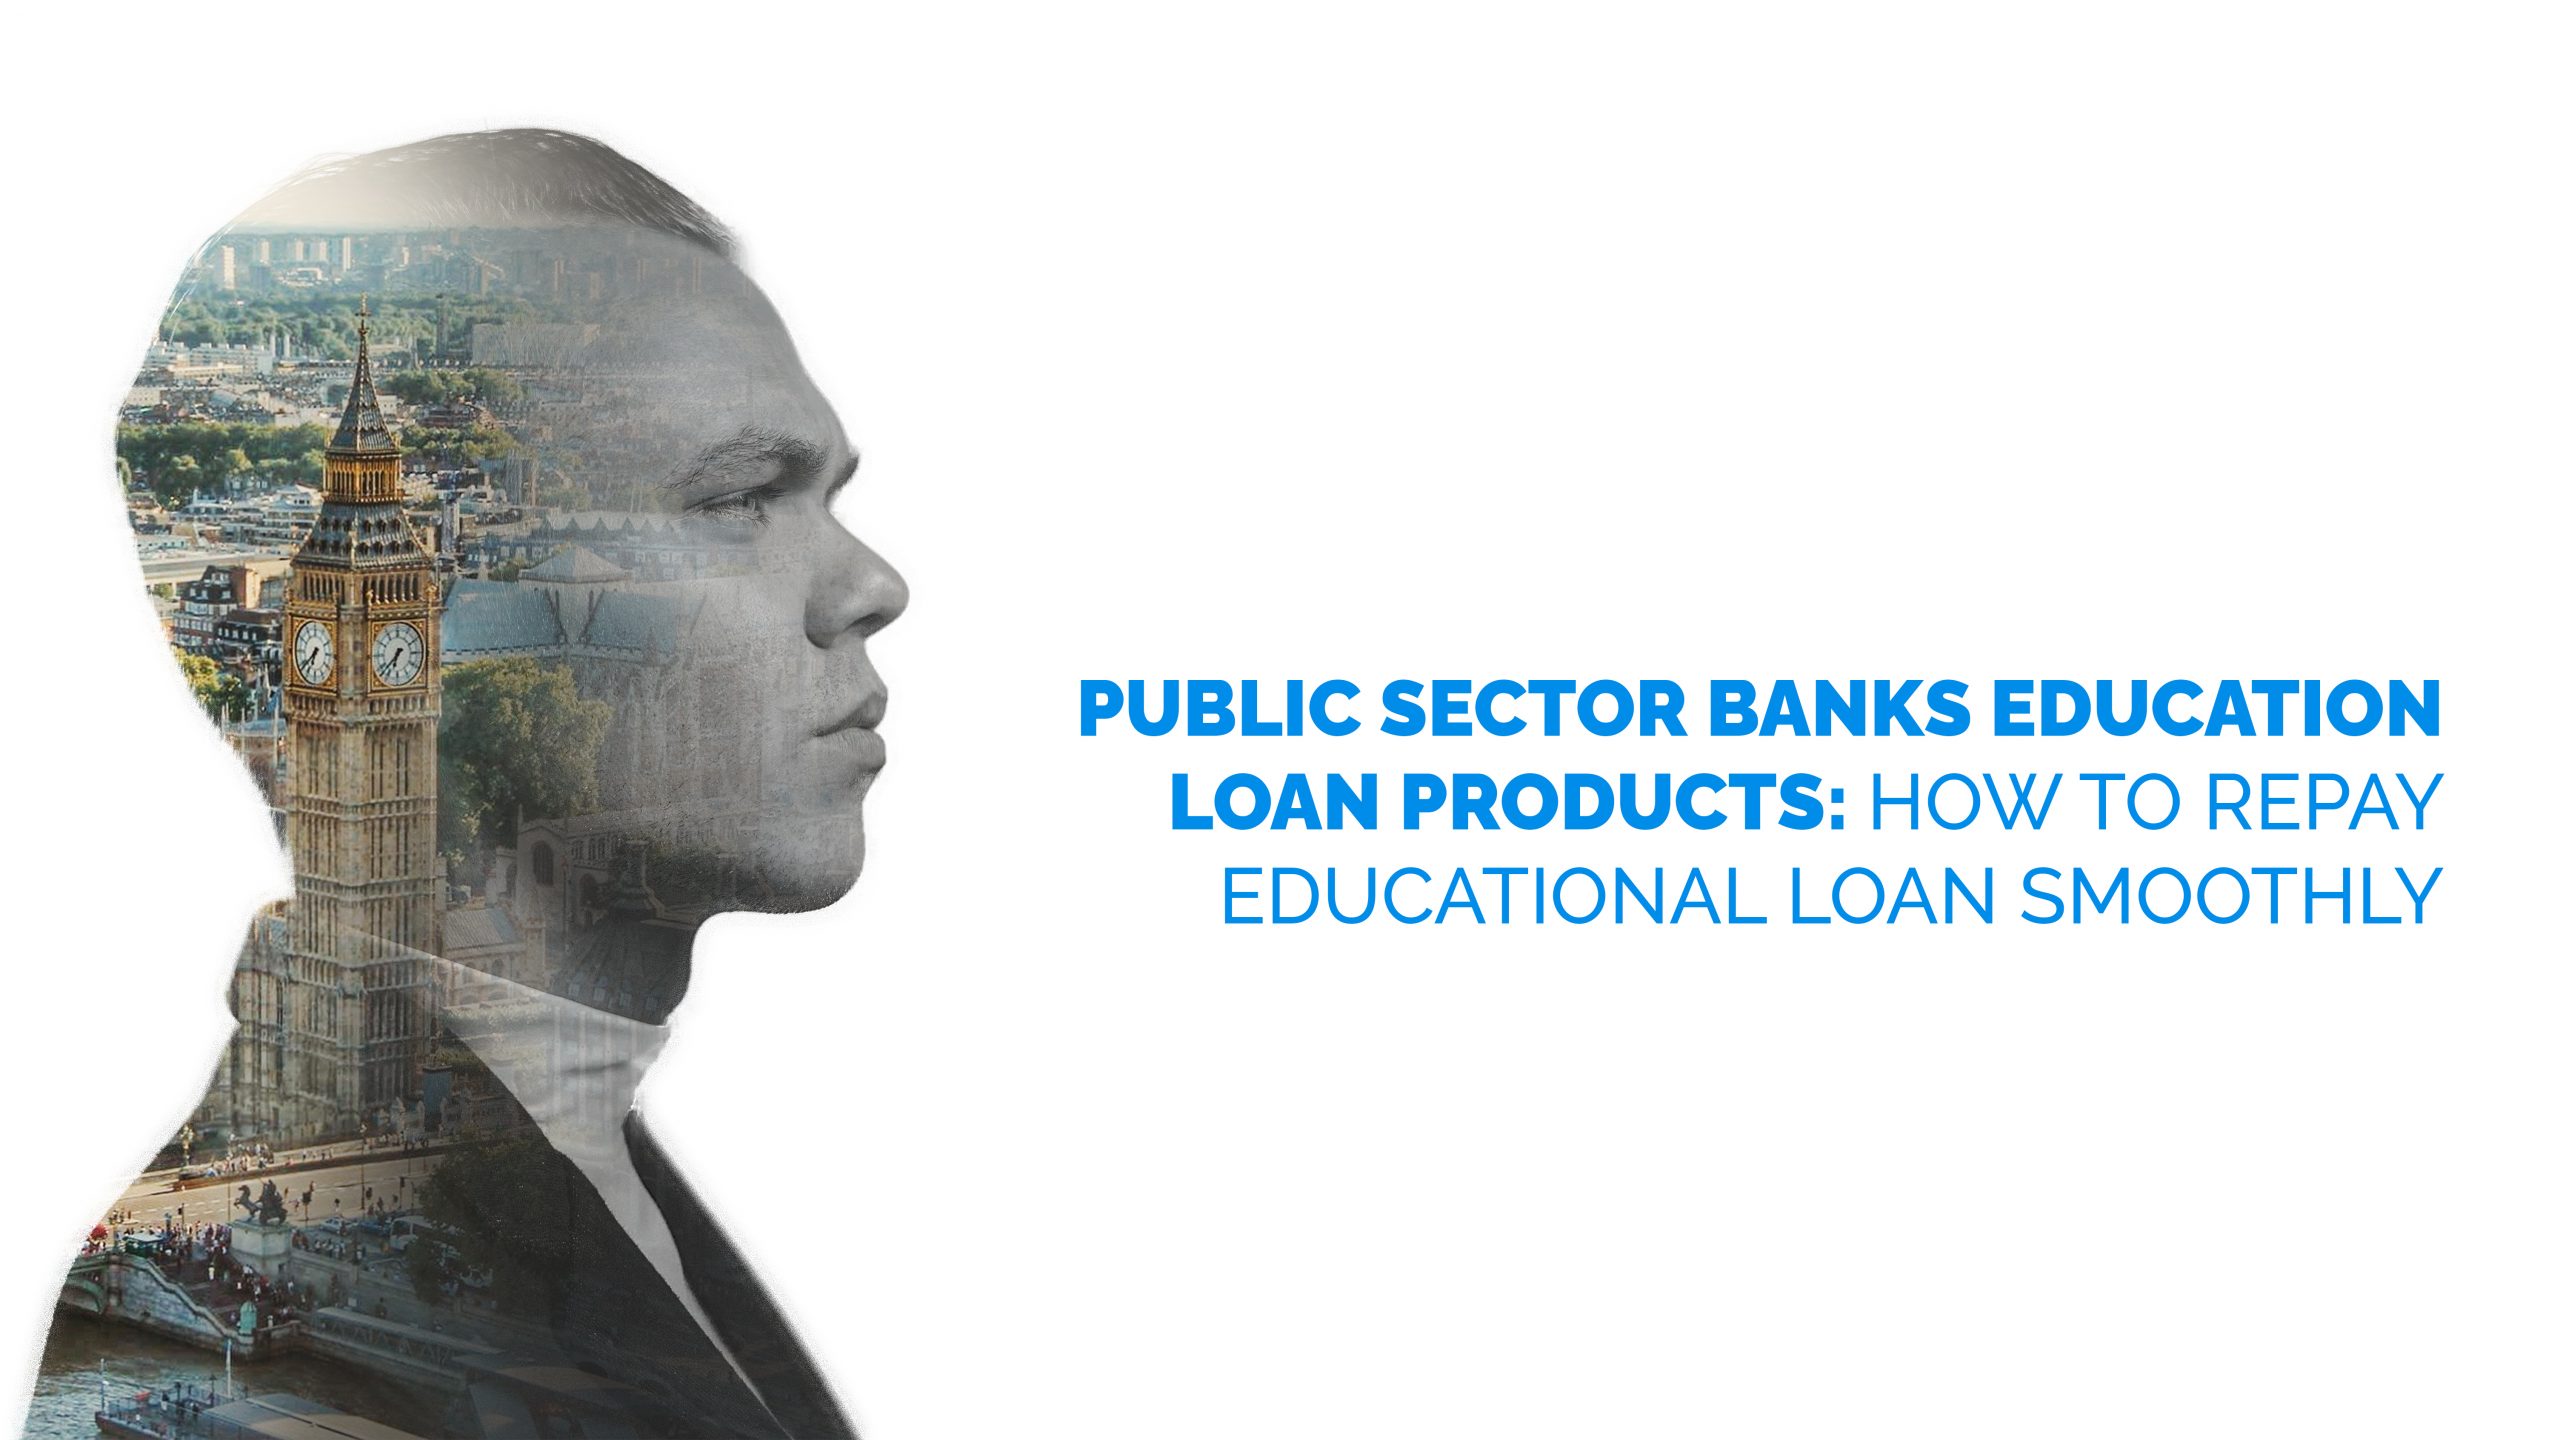 Public Sector Banks Education Loan Products: A Detailed Comparison